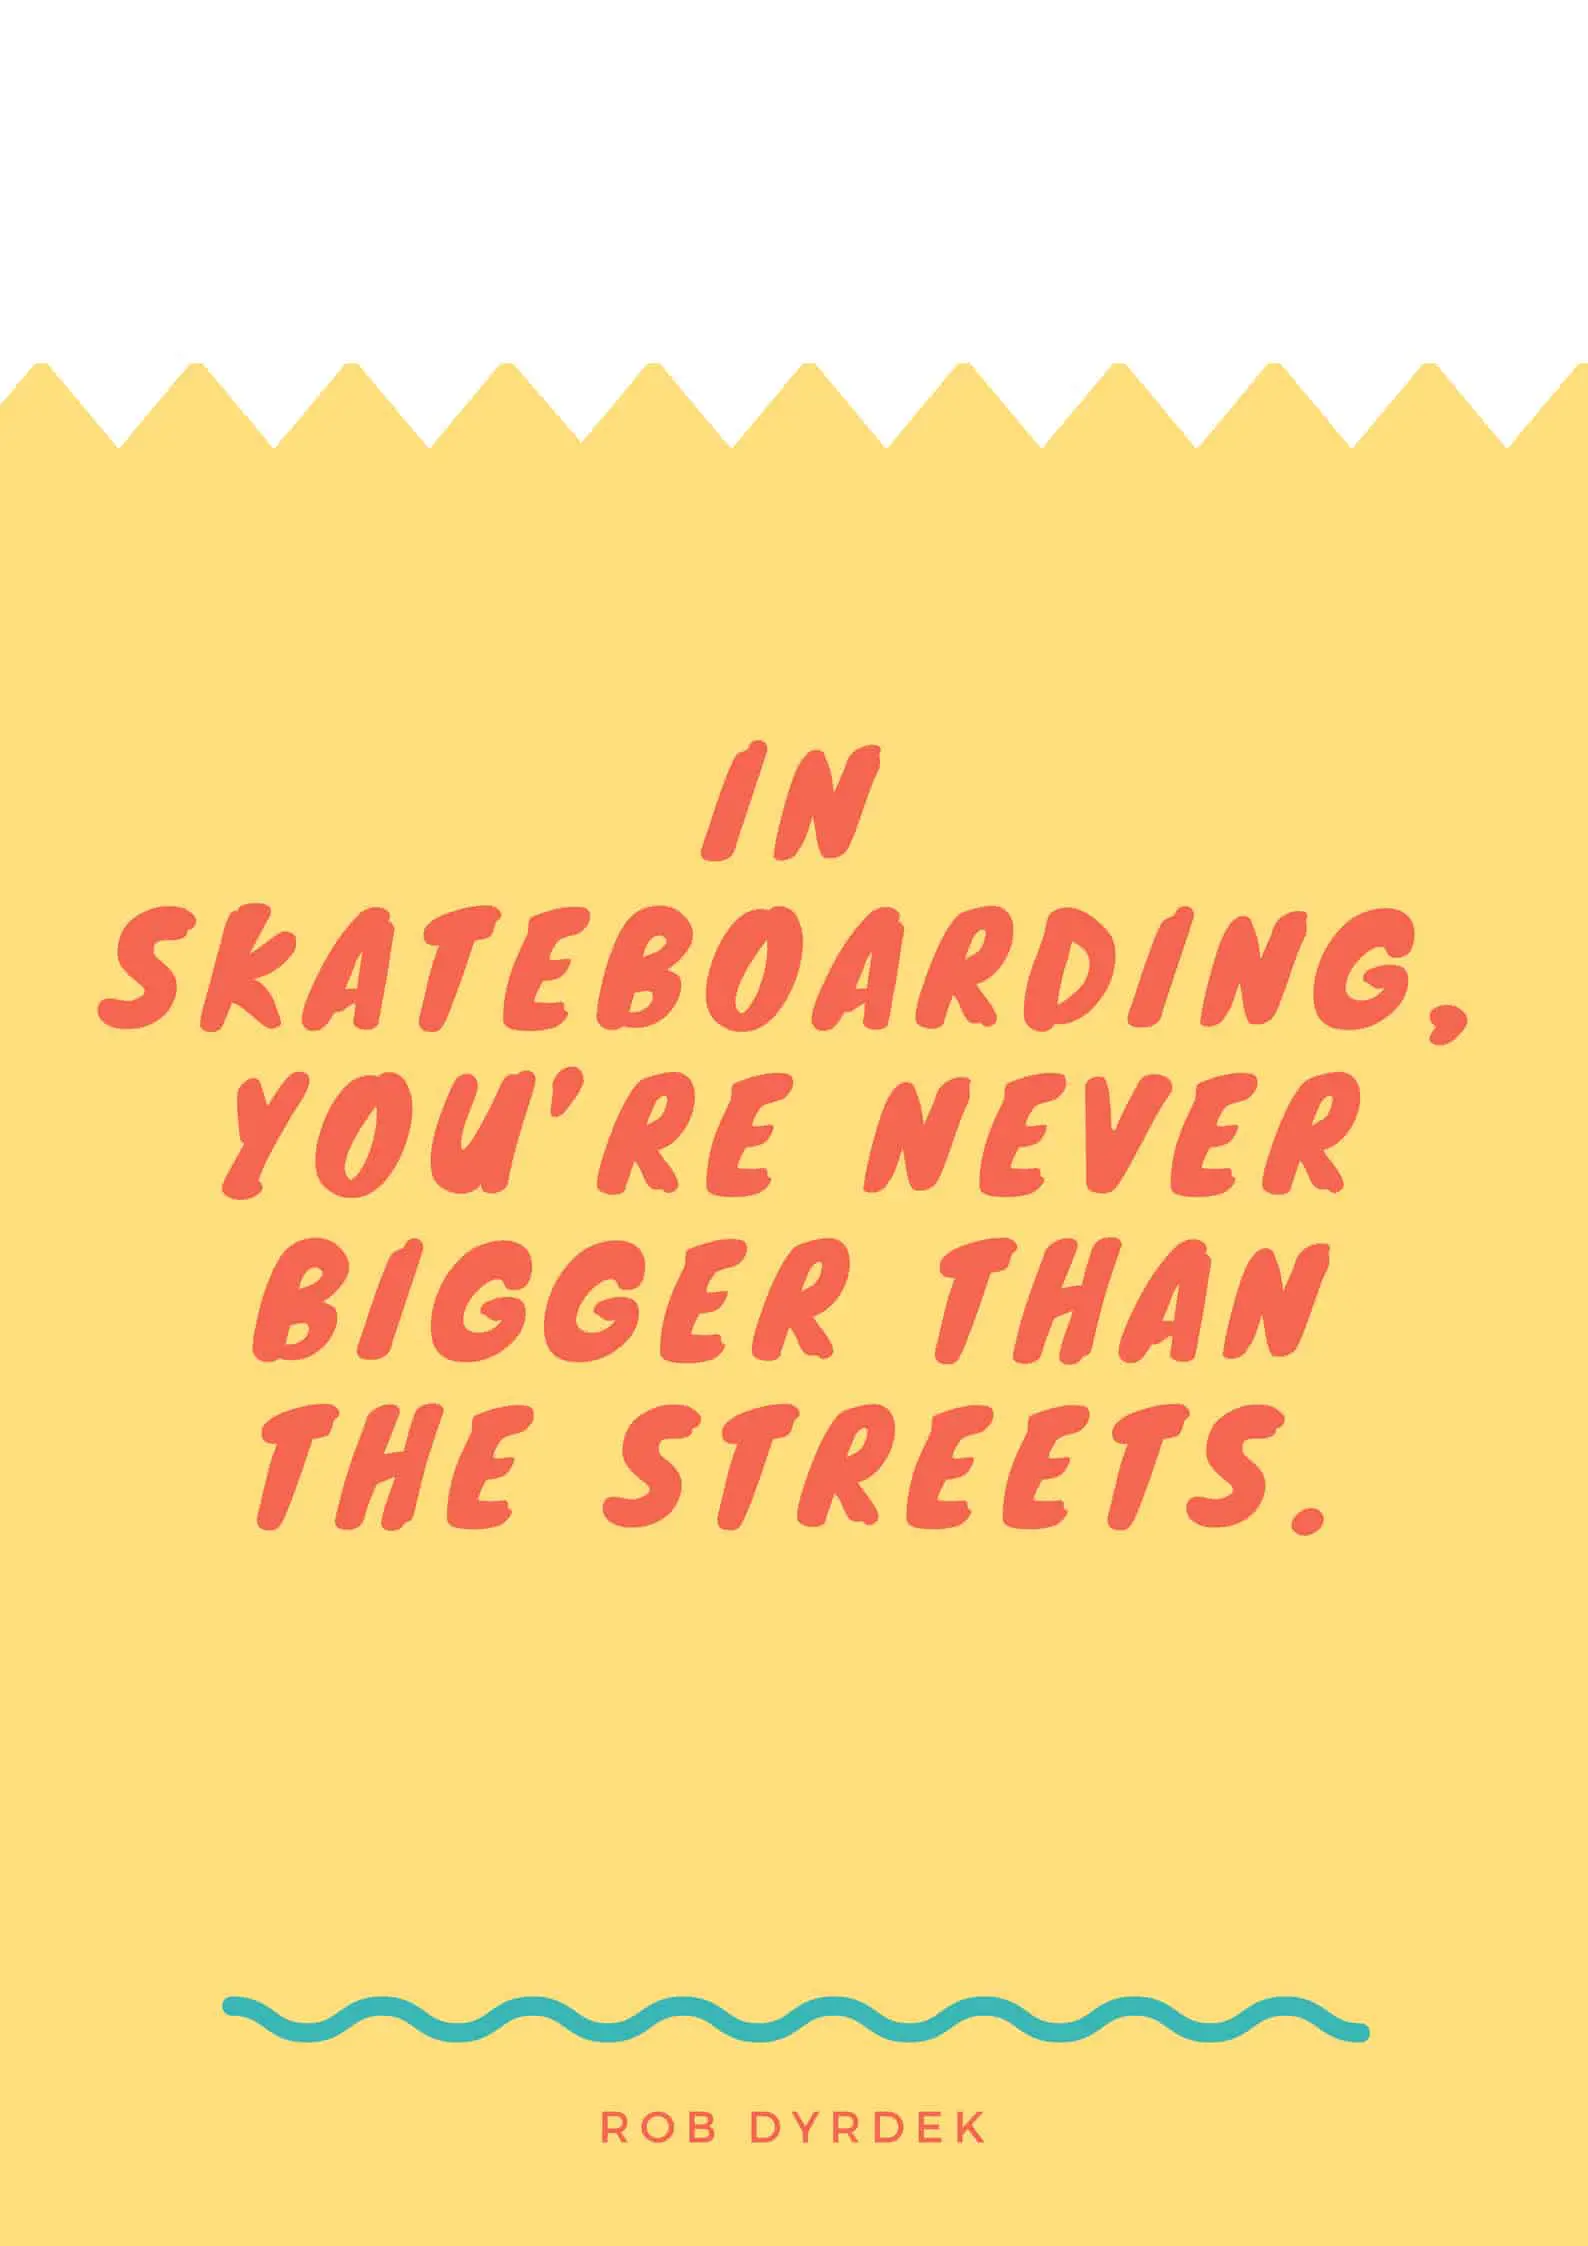 In skateboarding, you’re never bigger than the streets.